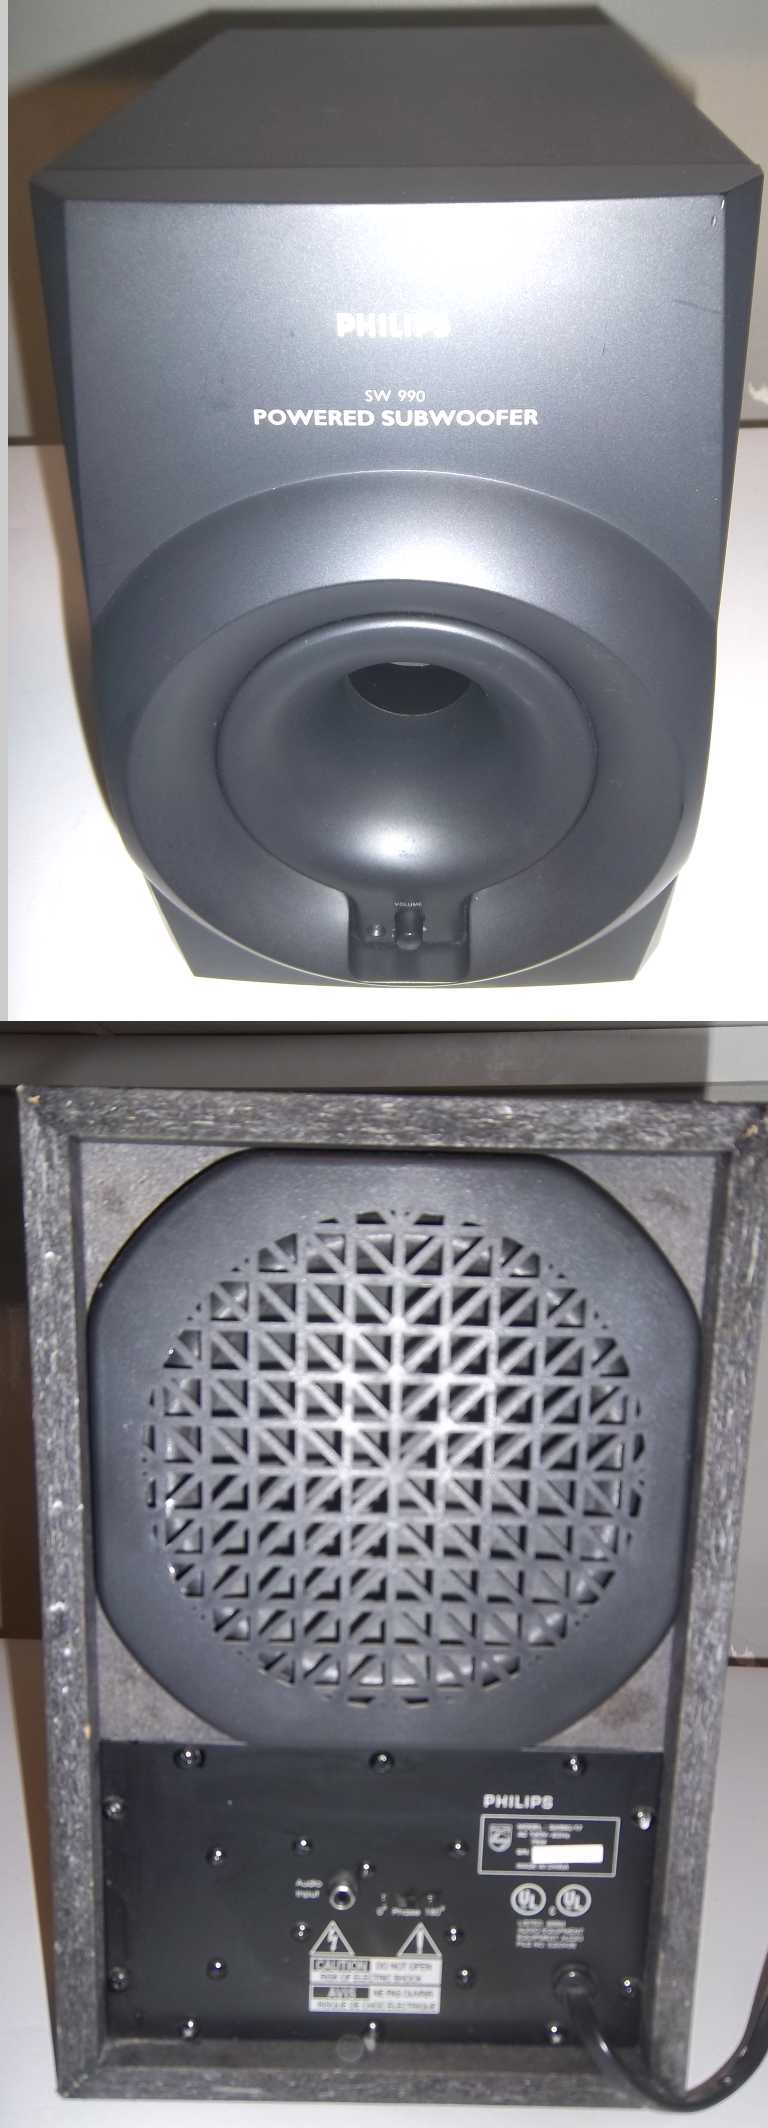 Warehouse - Philips SW990 Subwoofer